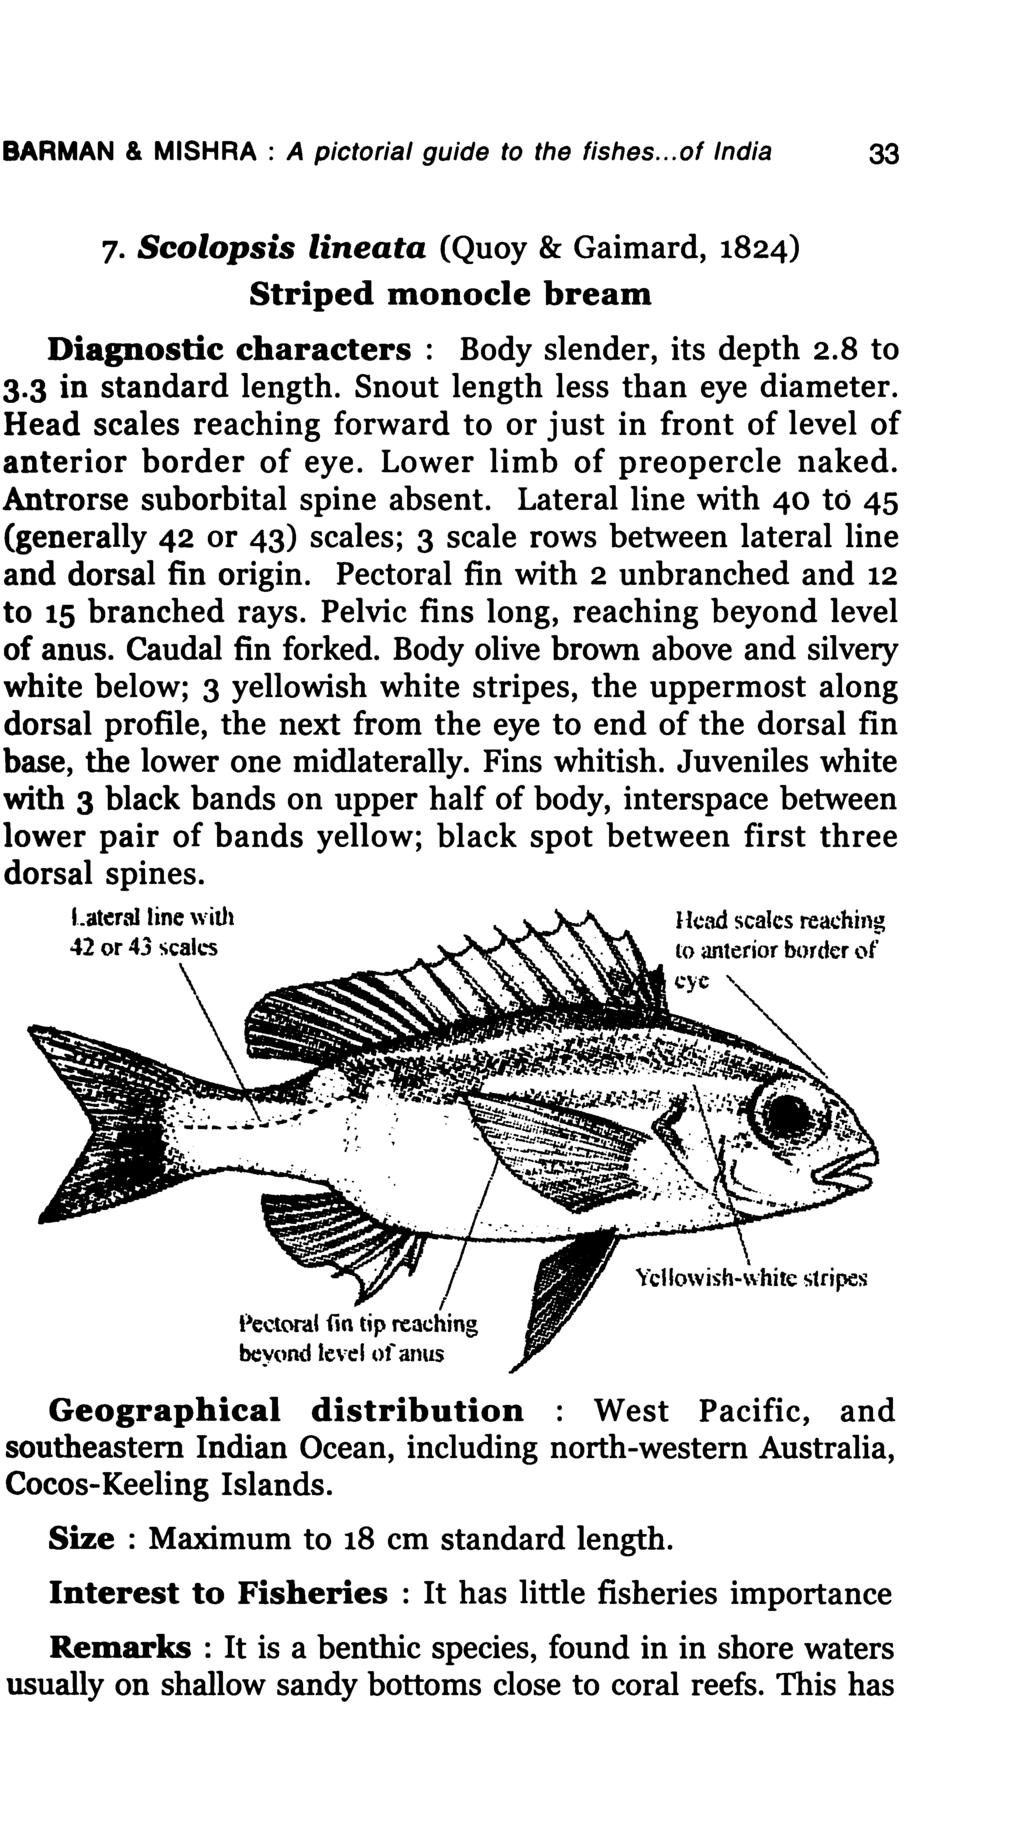 BARMAN & MISHRA : A pictorial guide to the fishes... of India 33 7. Scolopsis lineata (Quoy & Gaimard, 1824) Striped monocle bream Diagnostic characters: Body slender, its depth 2.8 to 3.